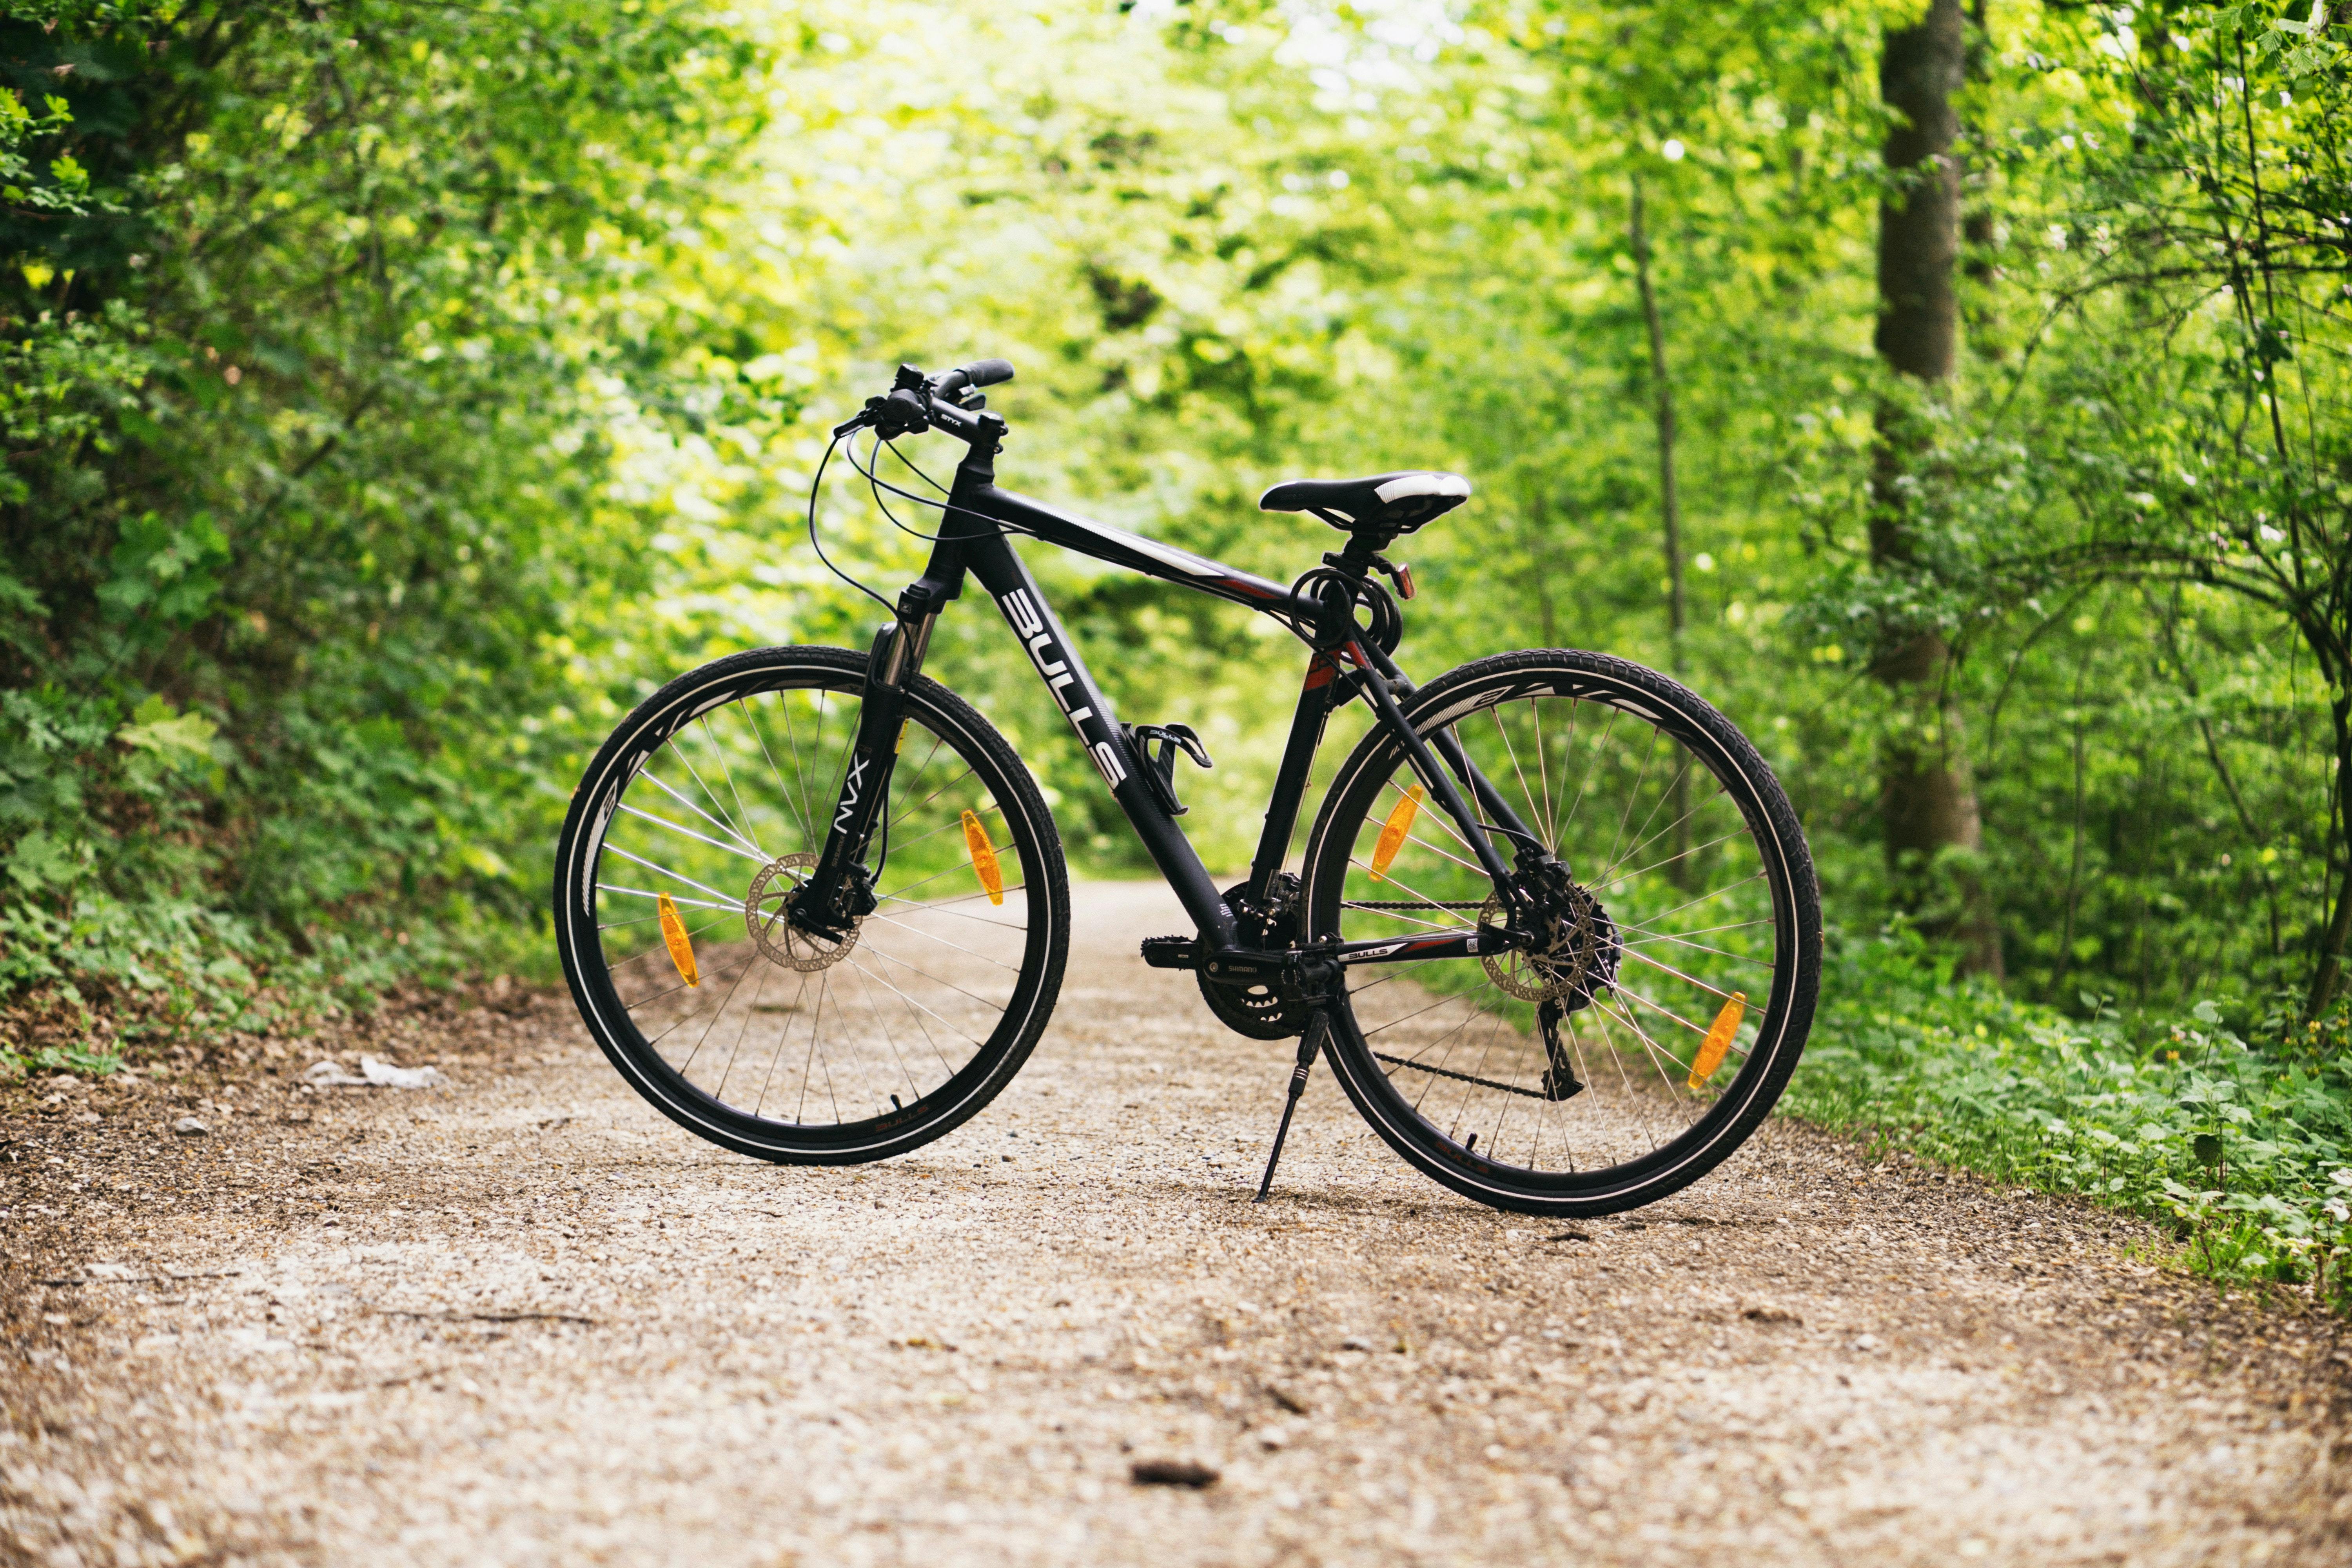 A black hybrid bicycle sits alone on a dirt path in a wooded area